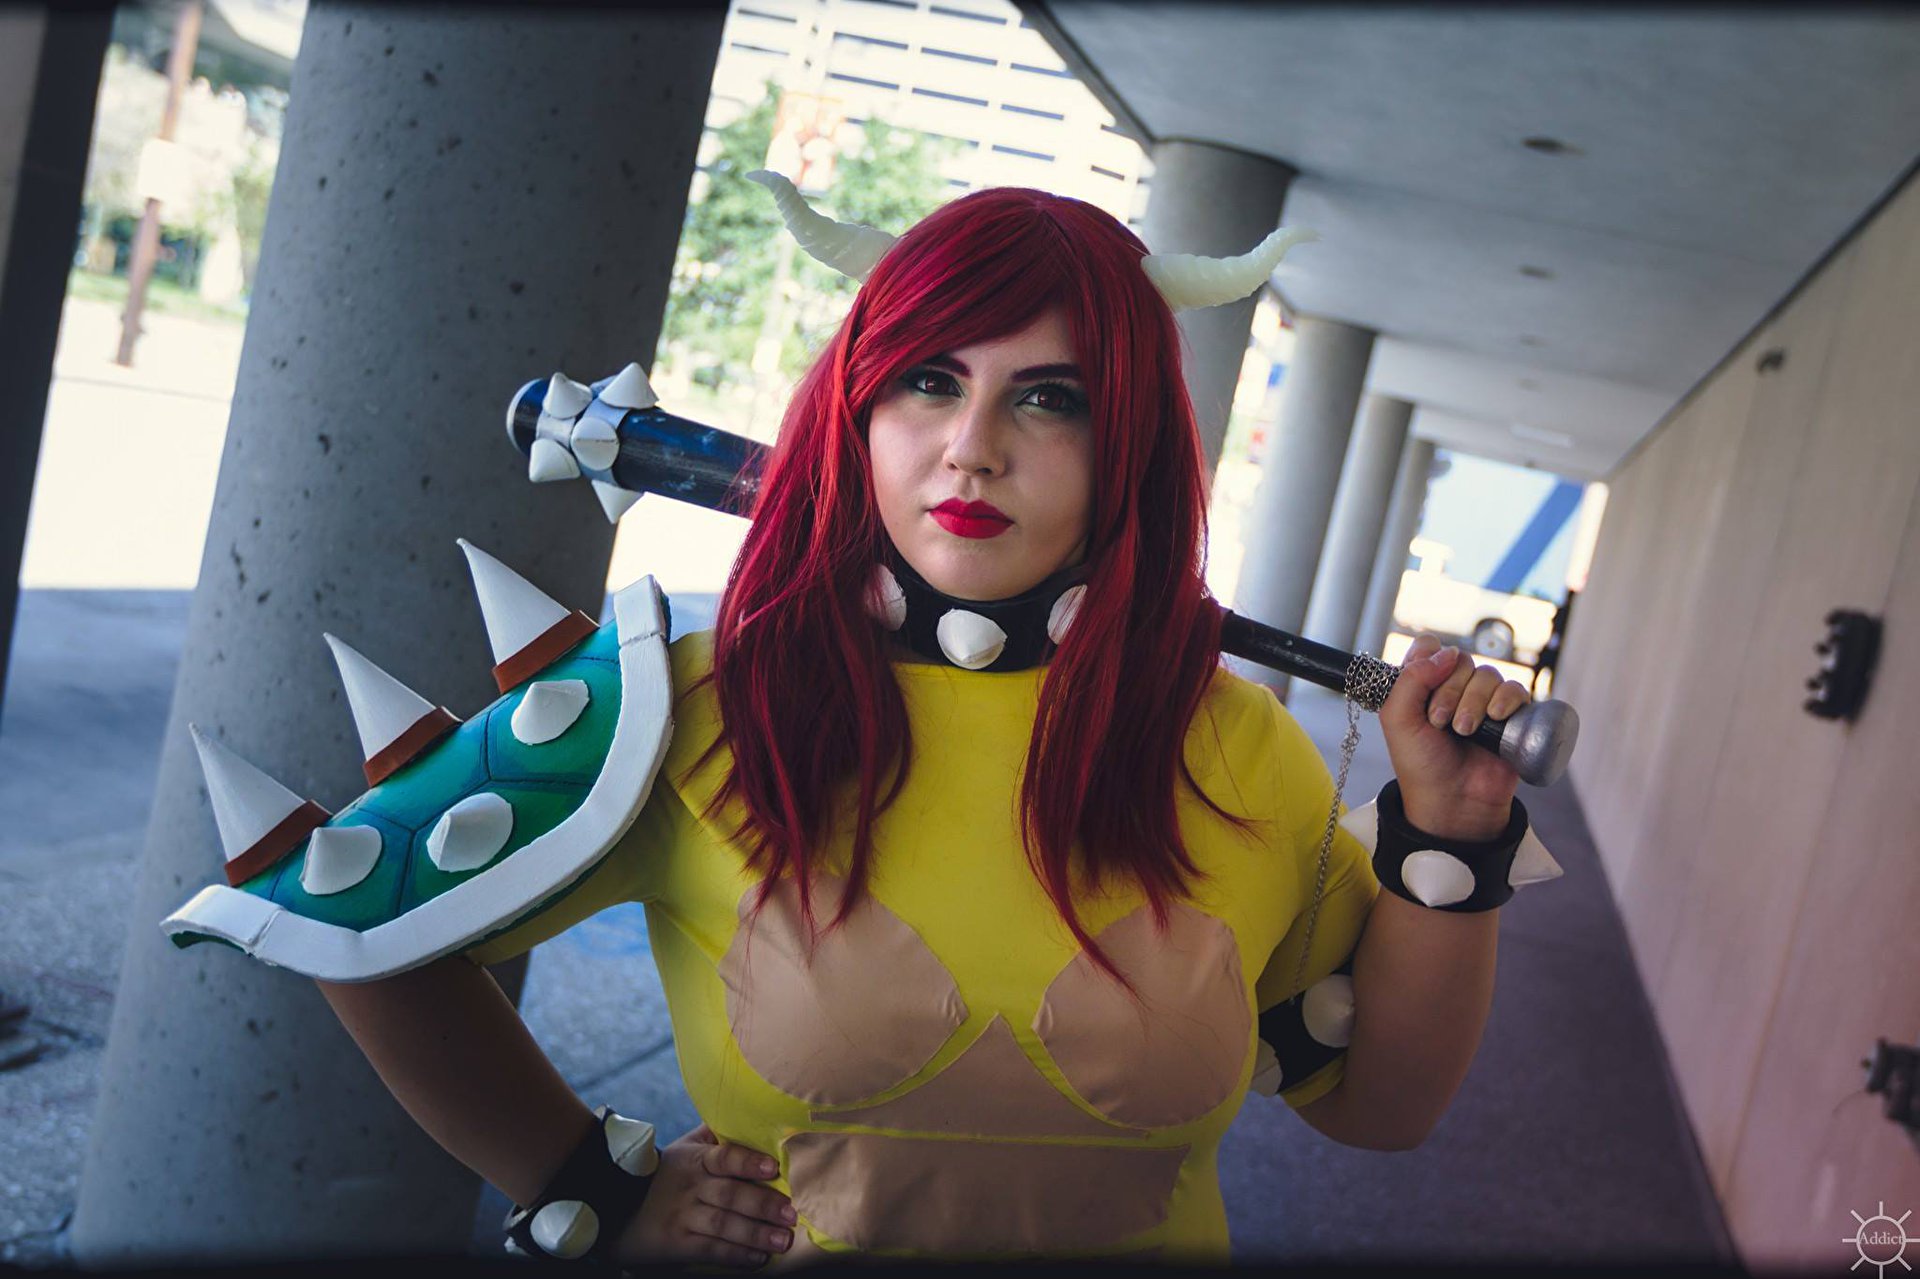 Cospix.net photo featuring Gabby Nu Cosplay